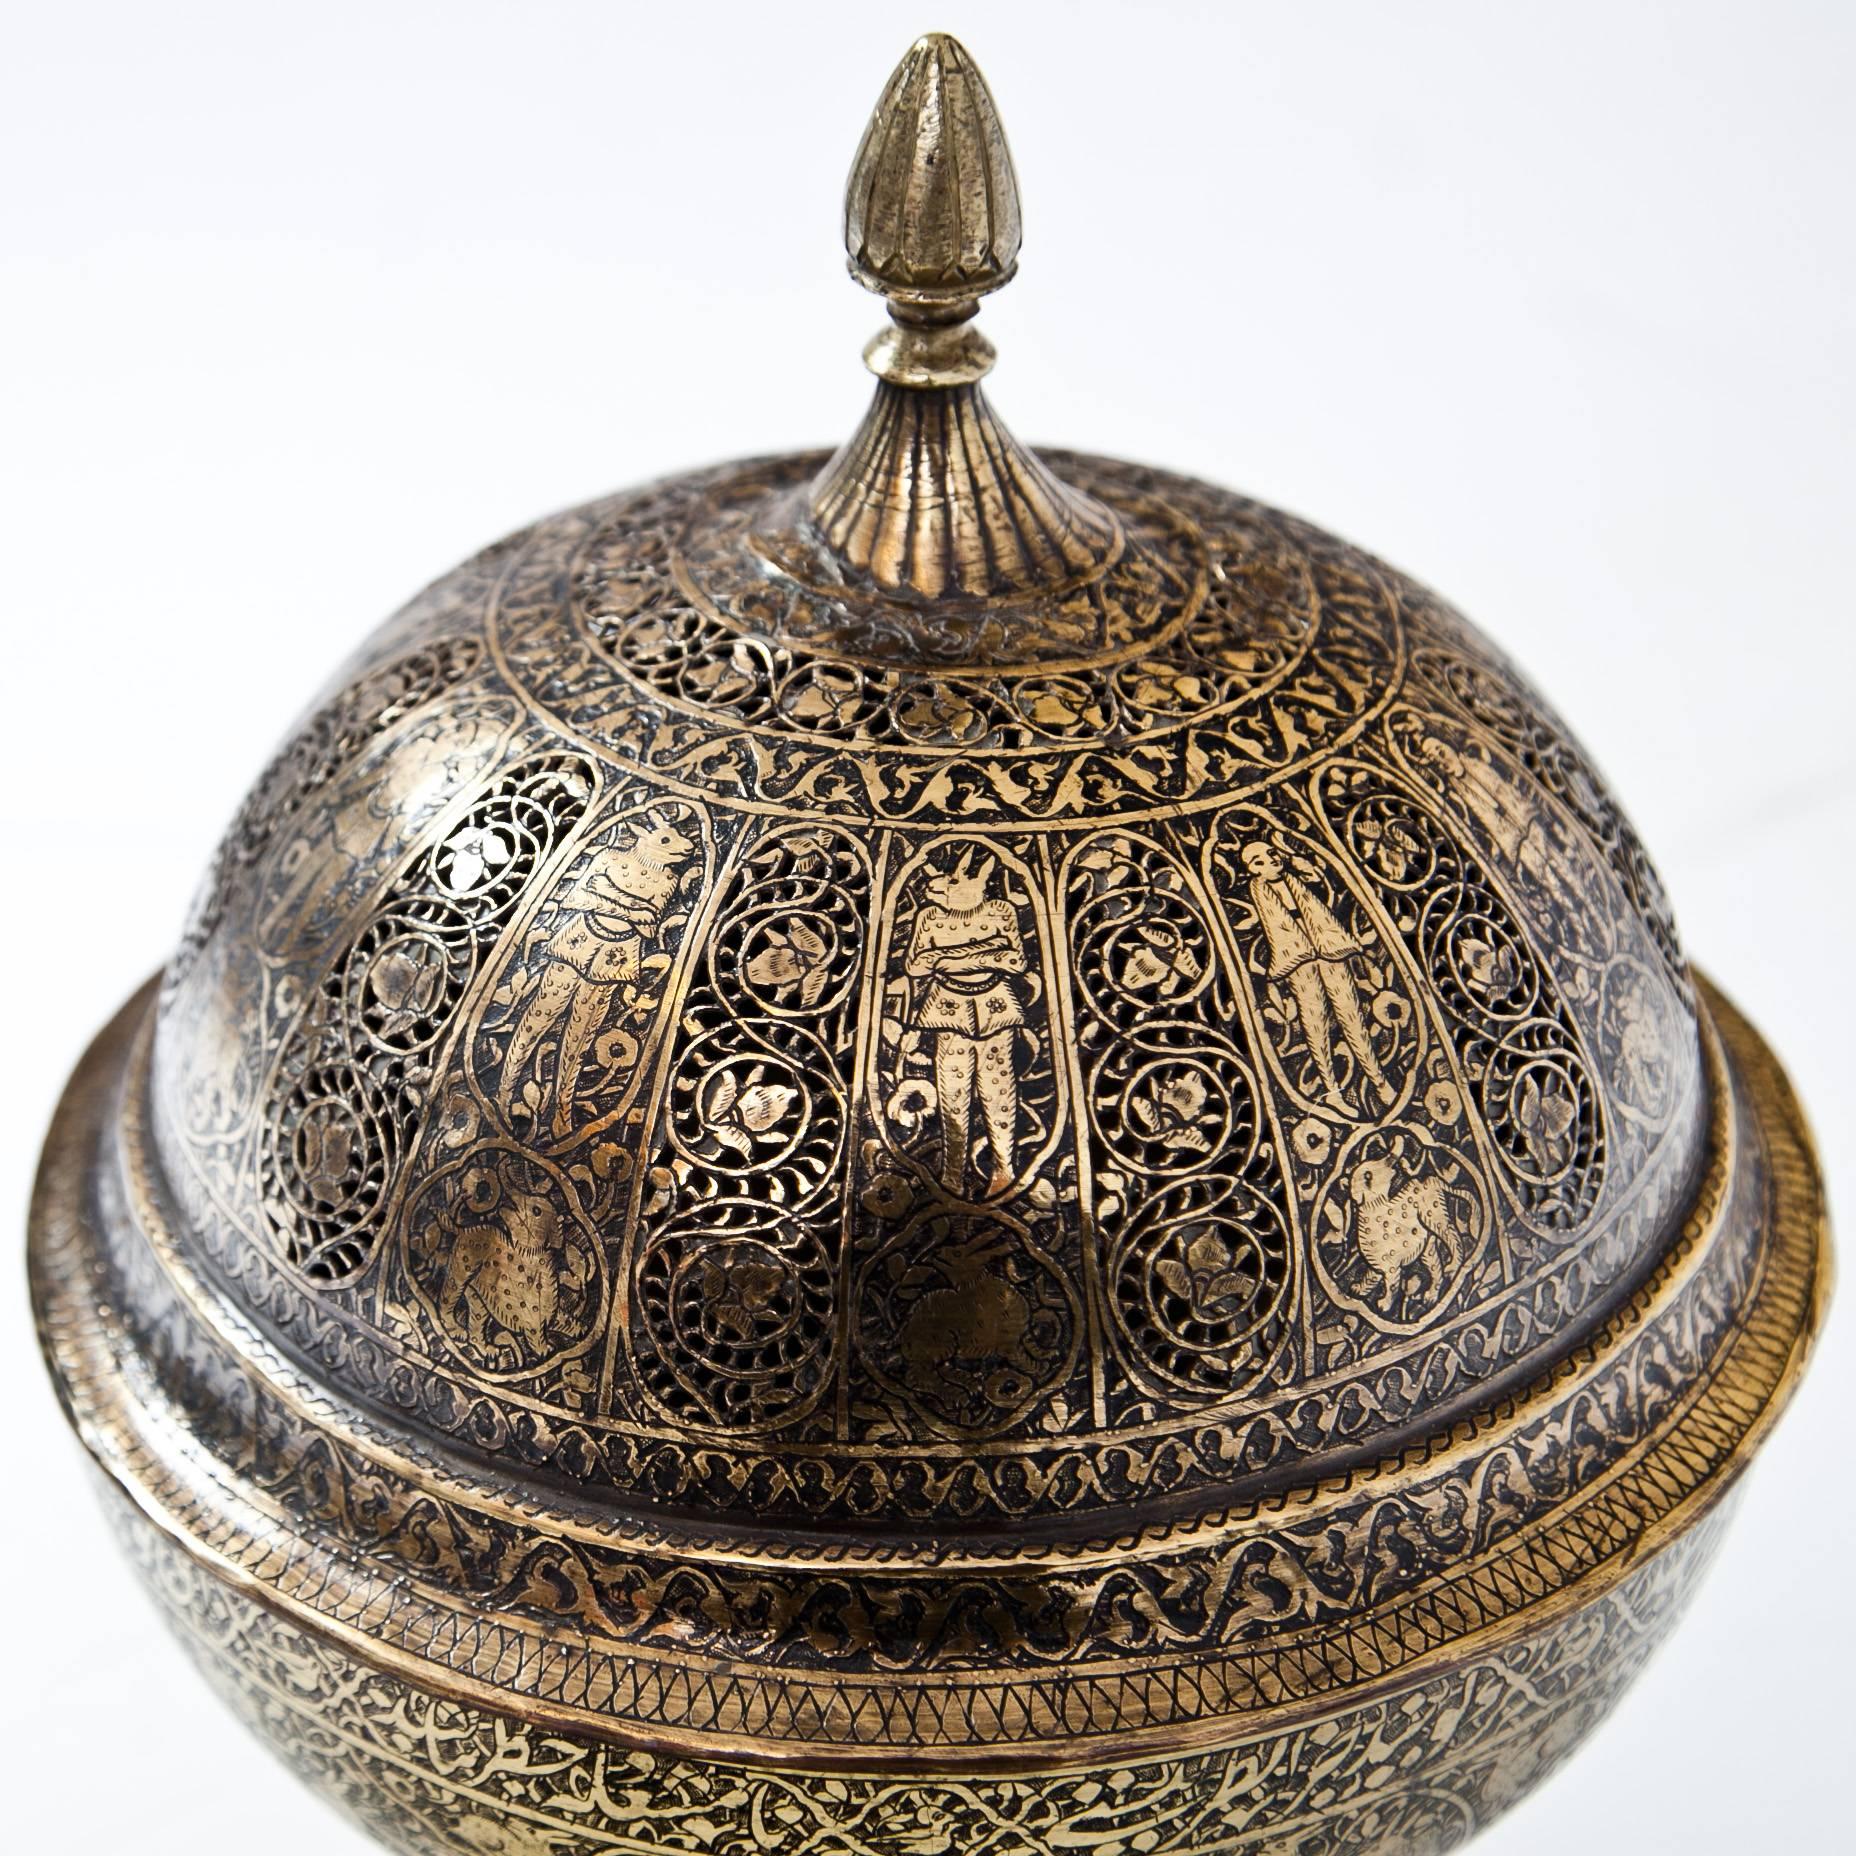 Censer, Probably Persia, 19th Century (Persisch)